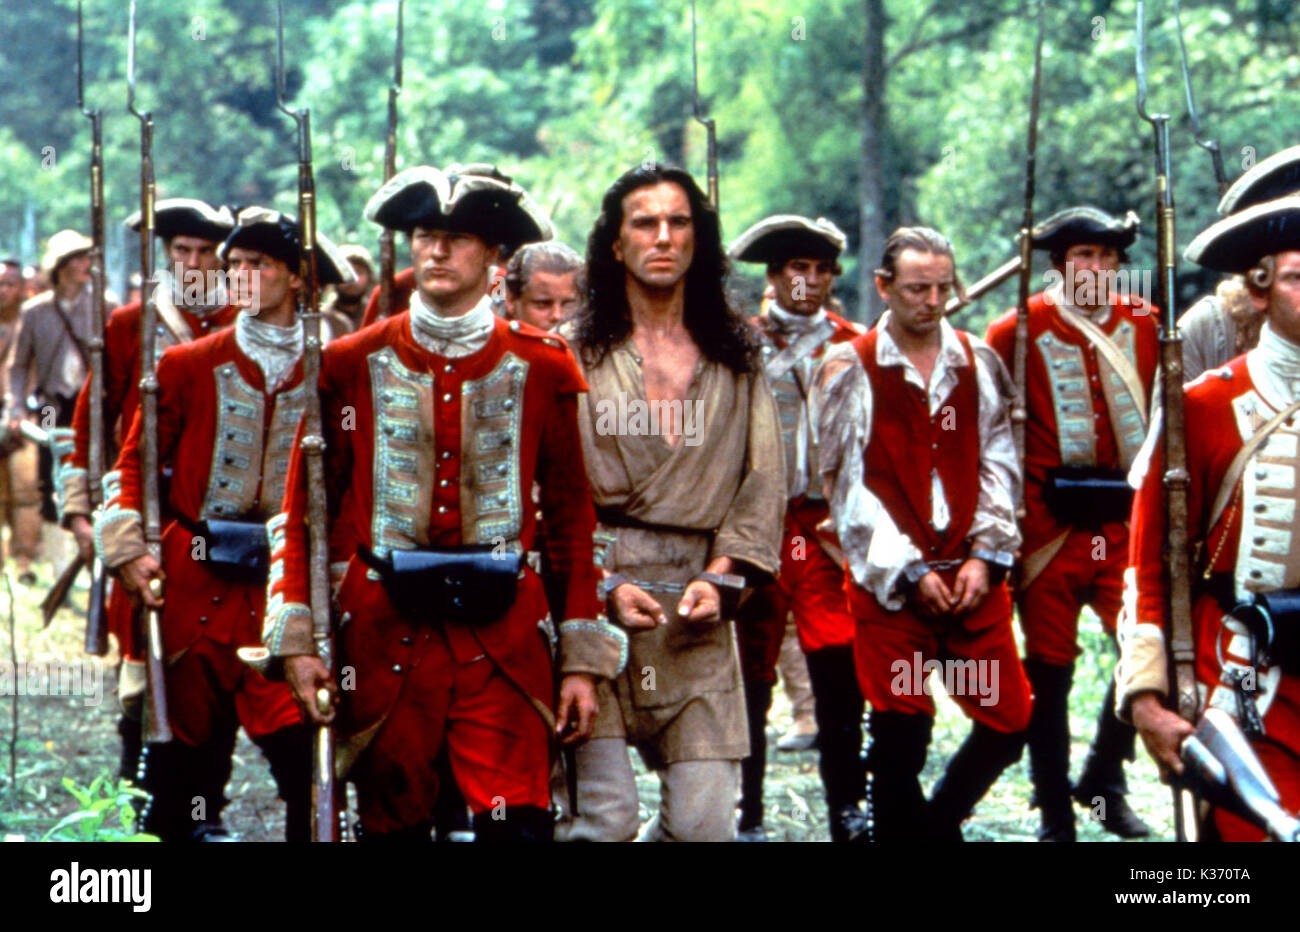 THE LAST OF THE MOHICANS MORGAN CREEK PRODUCTIONS DANIEL DAY-LEWIS centre     Date: 1992 Stock Photo